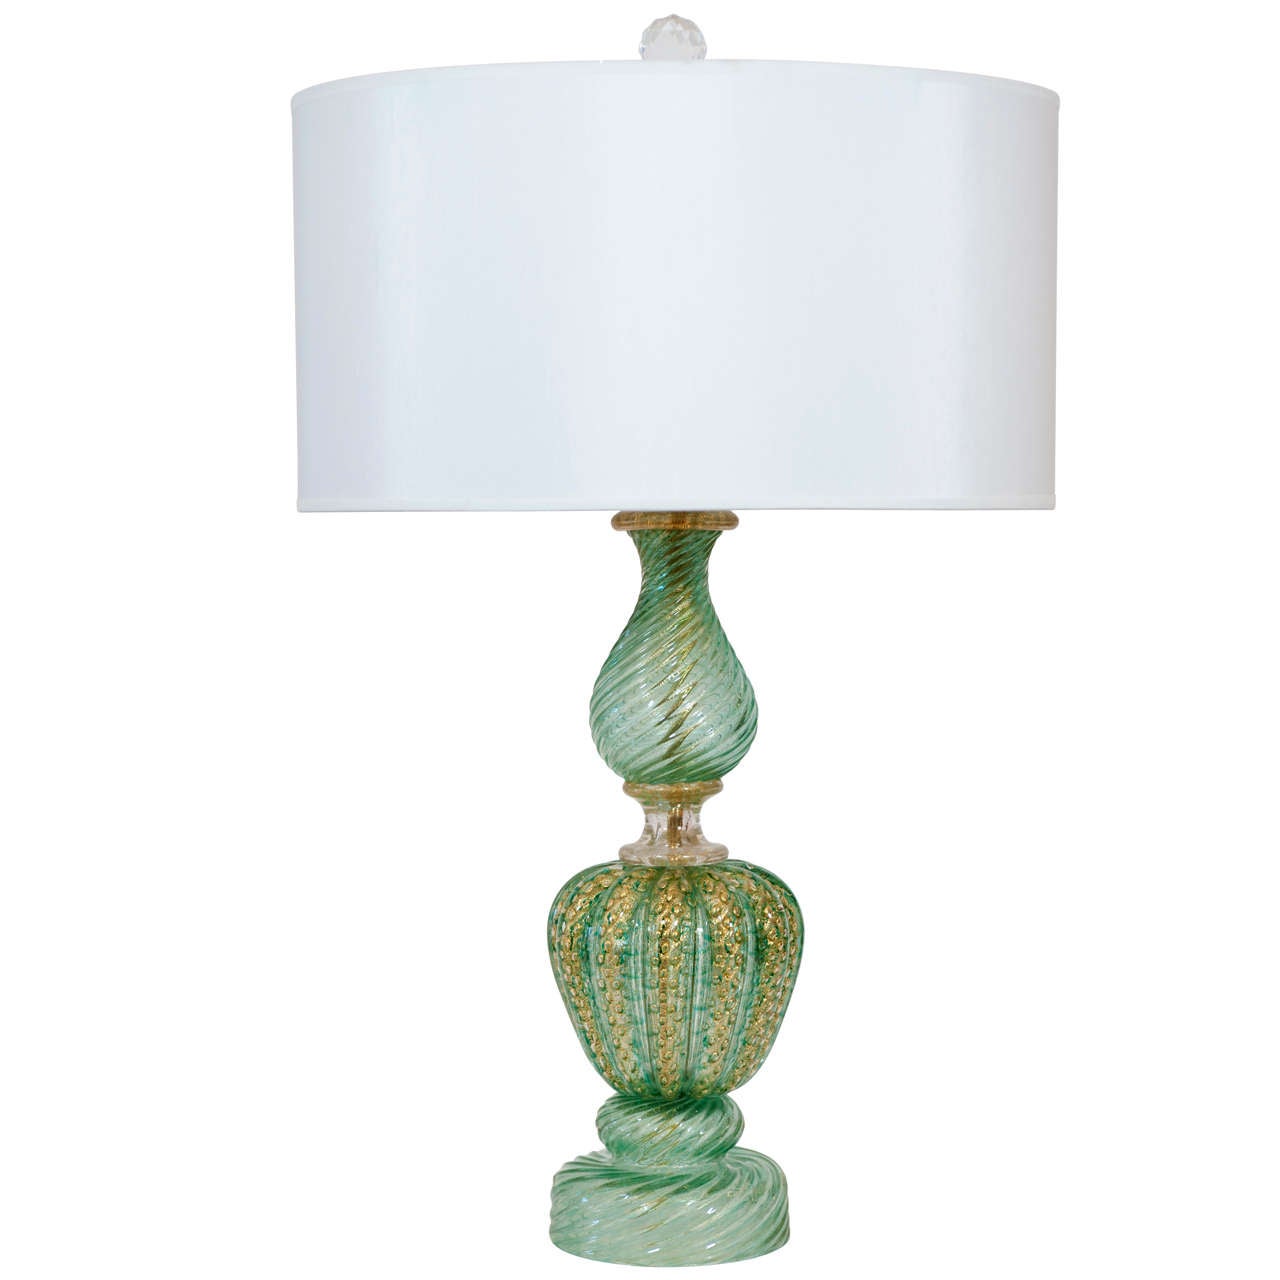 A Single Green And Gold Vintage Murano Lamp Attributed to Barovier